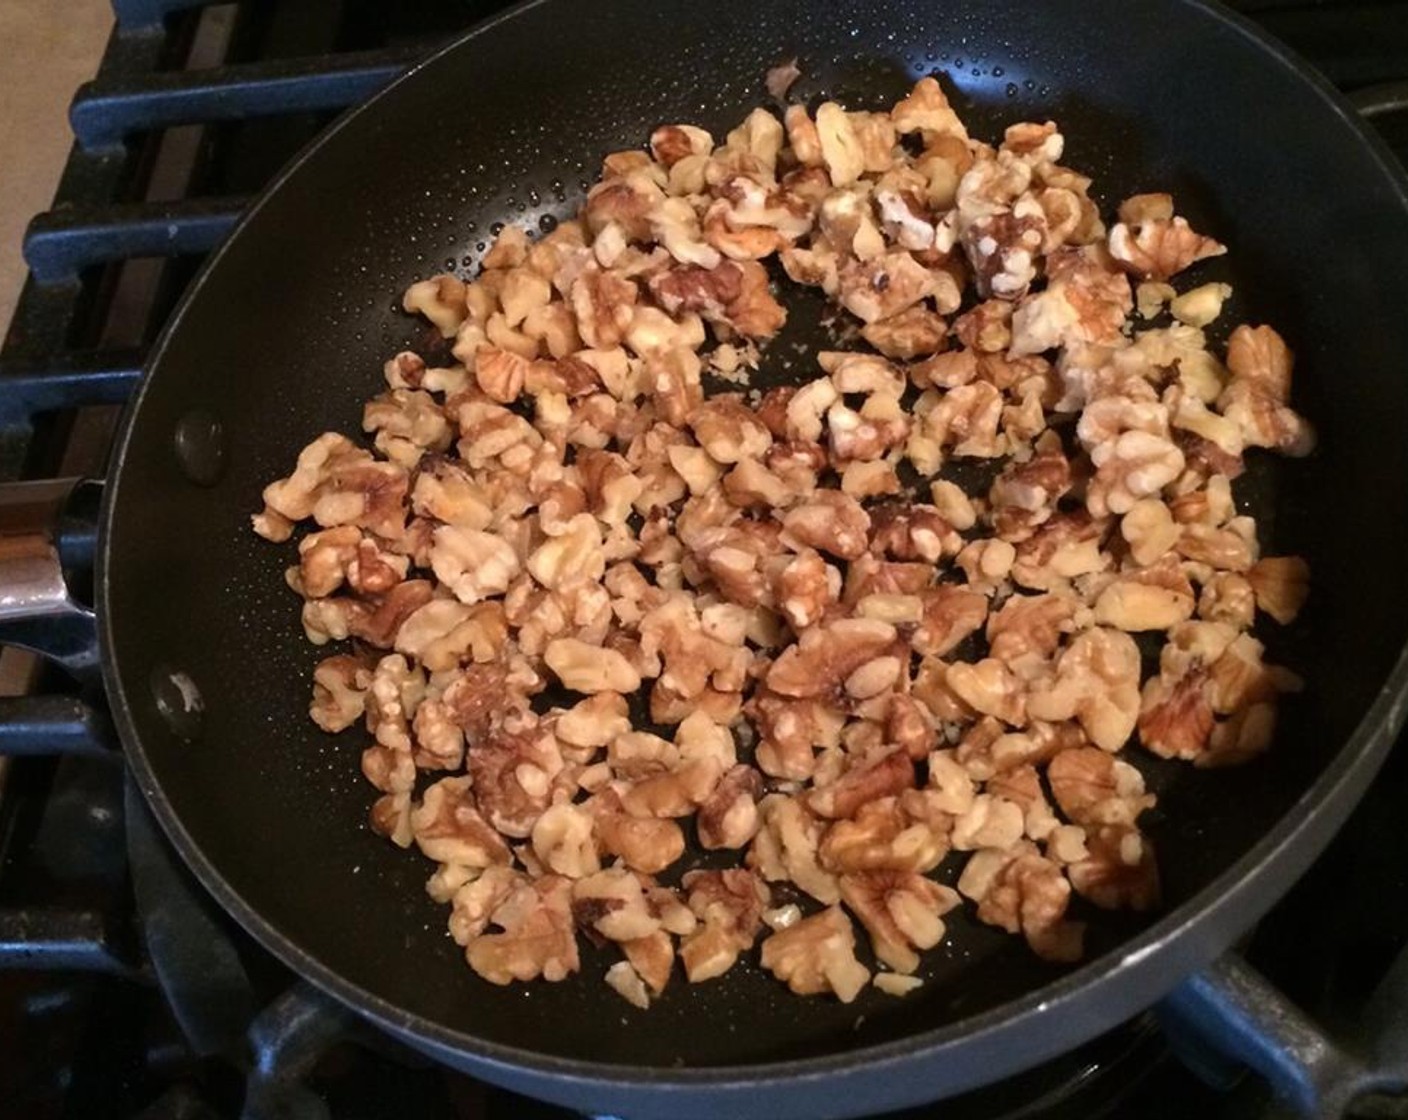 step 3 Add the walnut pieces to the sprayed pan and cook on the stove top for 2 minutes stiring constantly.